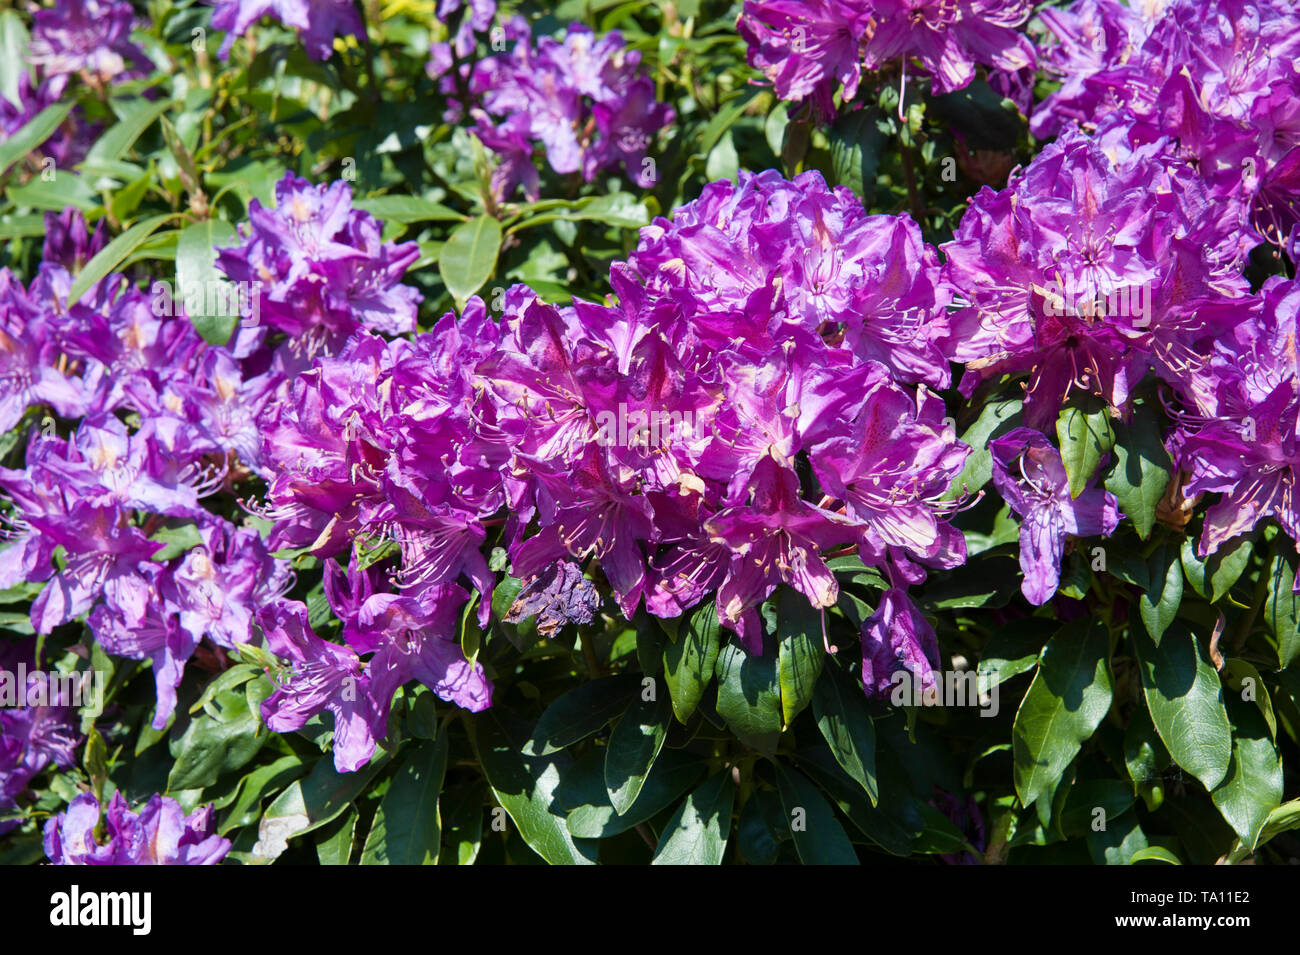 Rhododendron Blossom Stock Photo